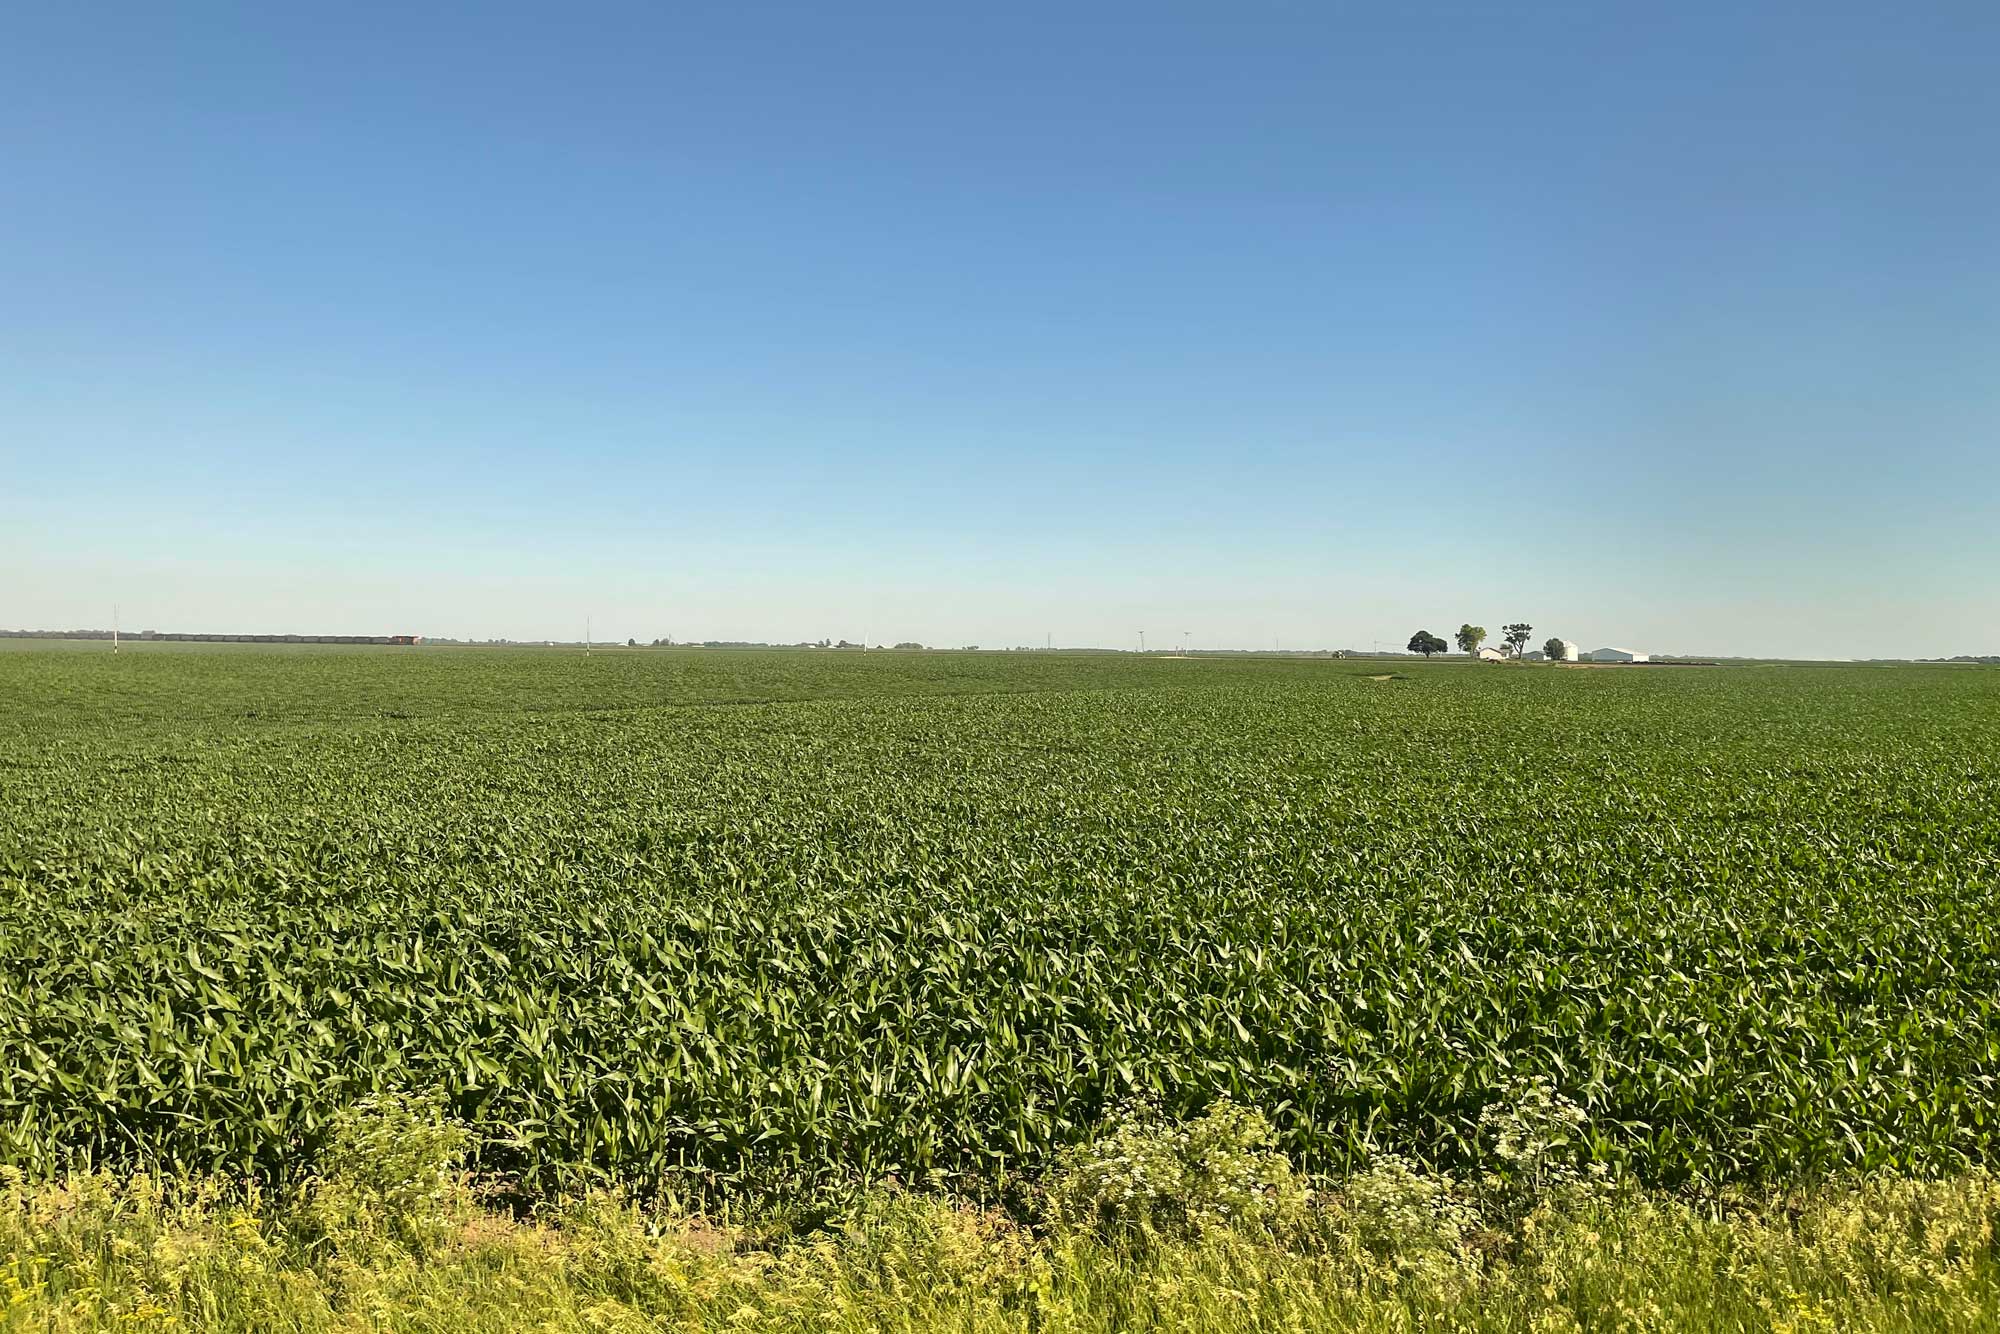 Photograph of a cornfield in Illinois. The photo shows a flat field of green corn plants with a small group of buildings on the horizon in the far distance. The sky is clear and blue.